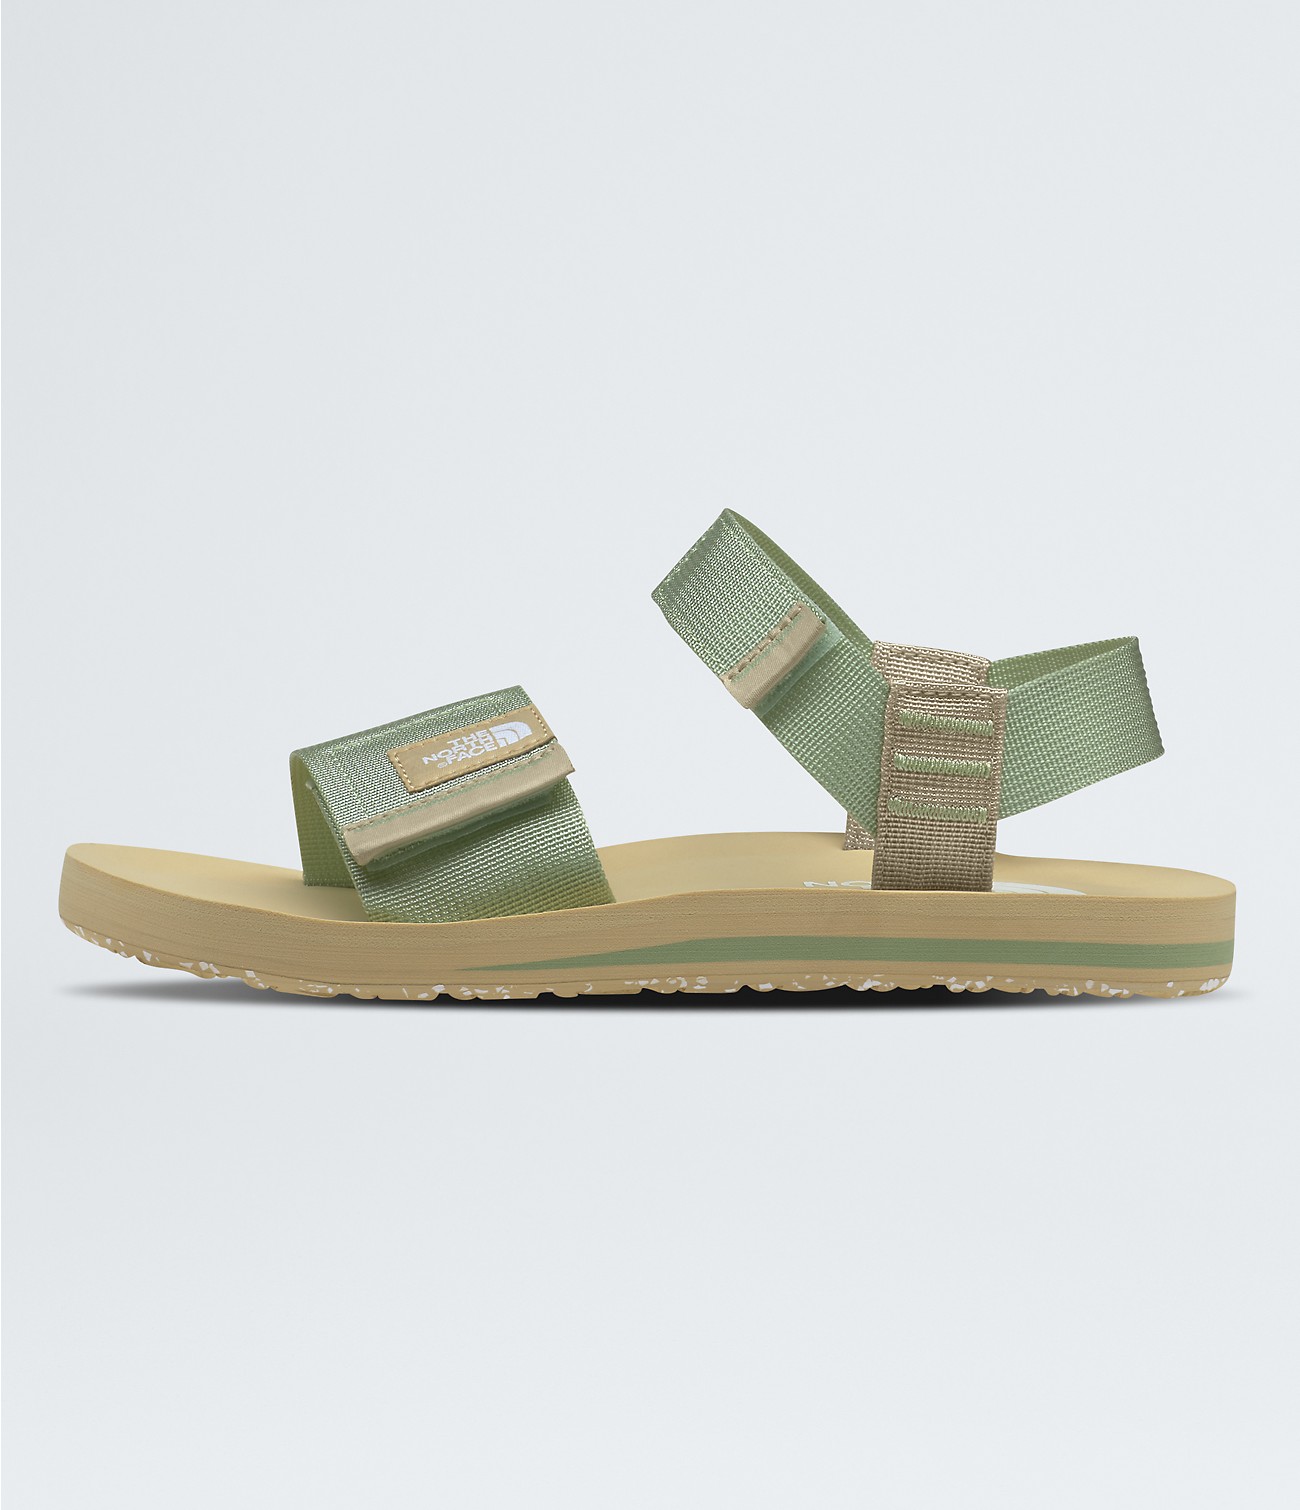 Women’s Skeena Sandals | The North Face